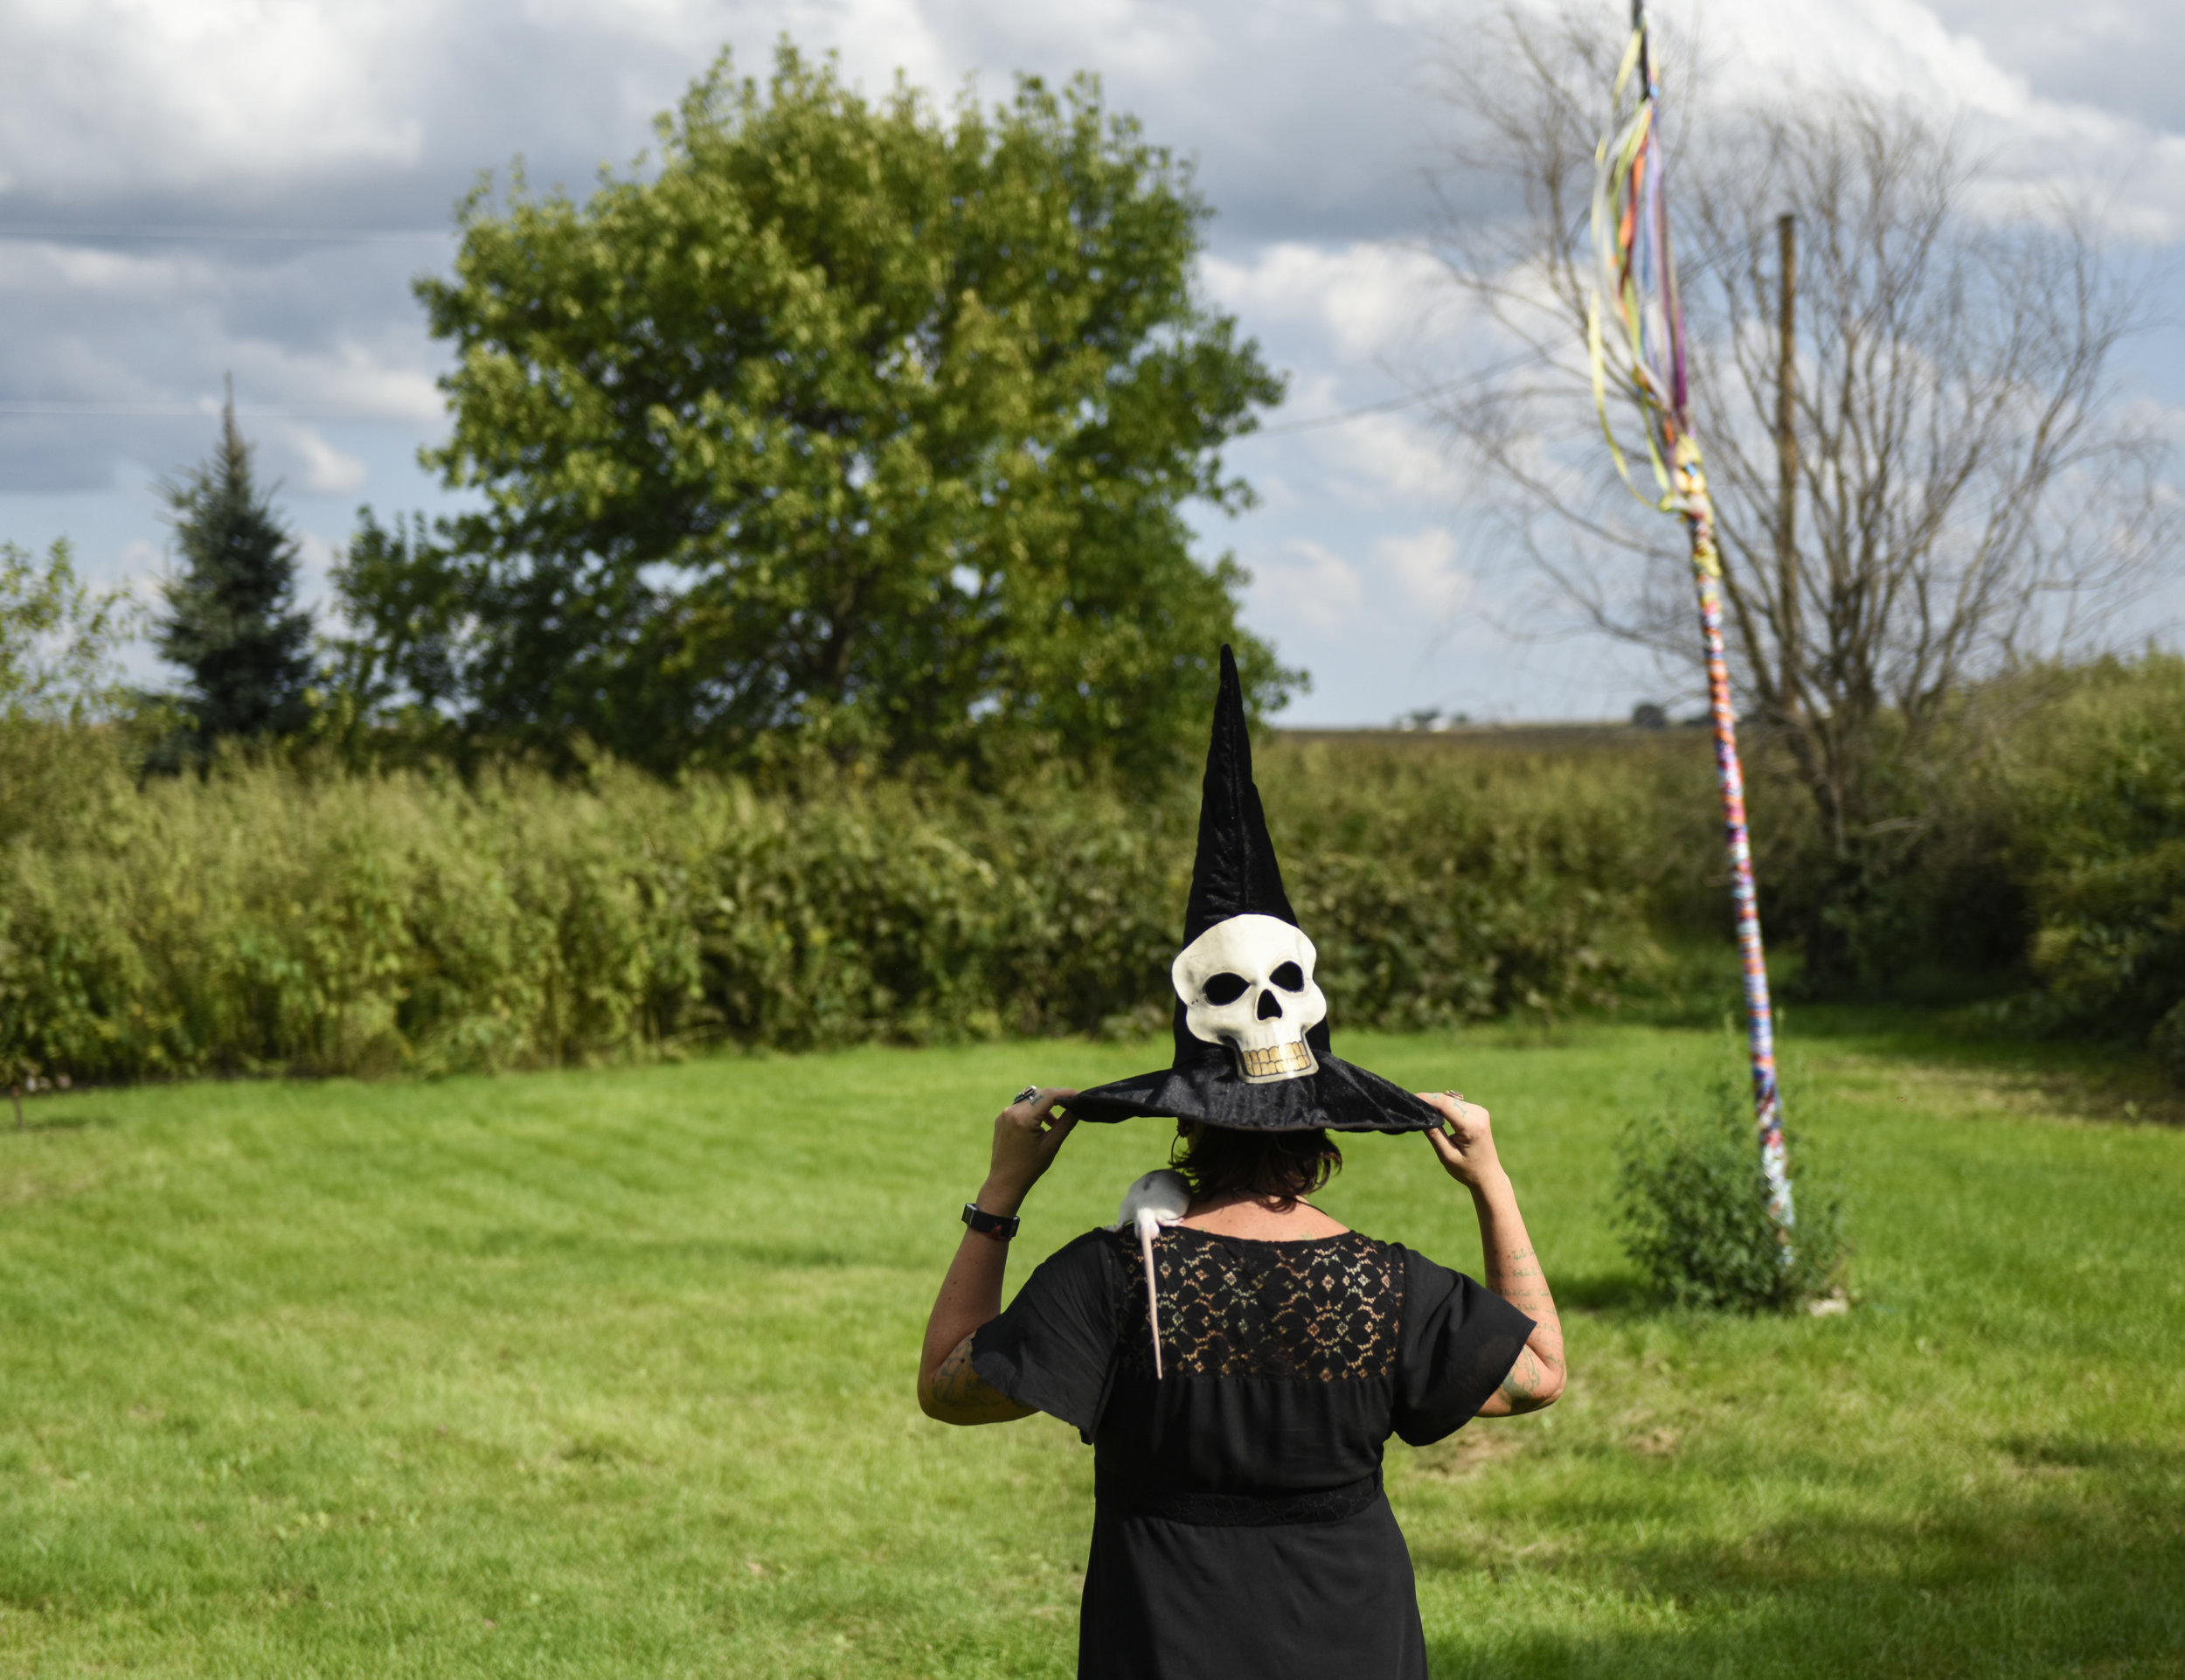  Melanie Hexen stands near her home in rural Iowa on Tuesday, Sept. 4, 2018, with her pet rat on her shoulder. She is part of a family that includes three generations of witches.&nbsp; 